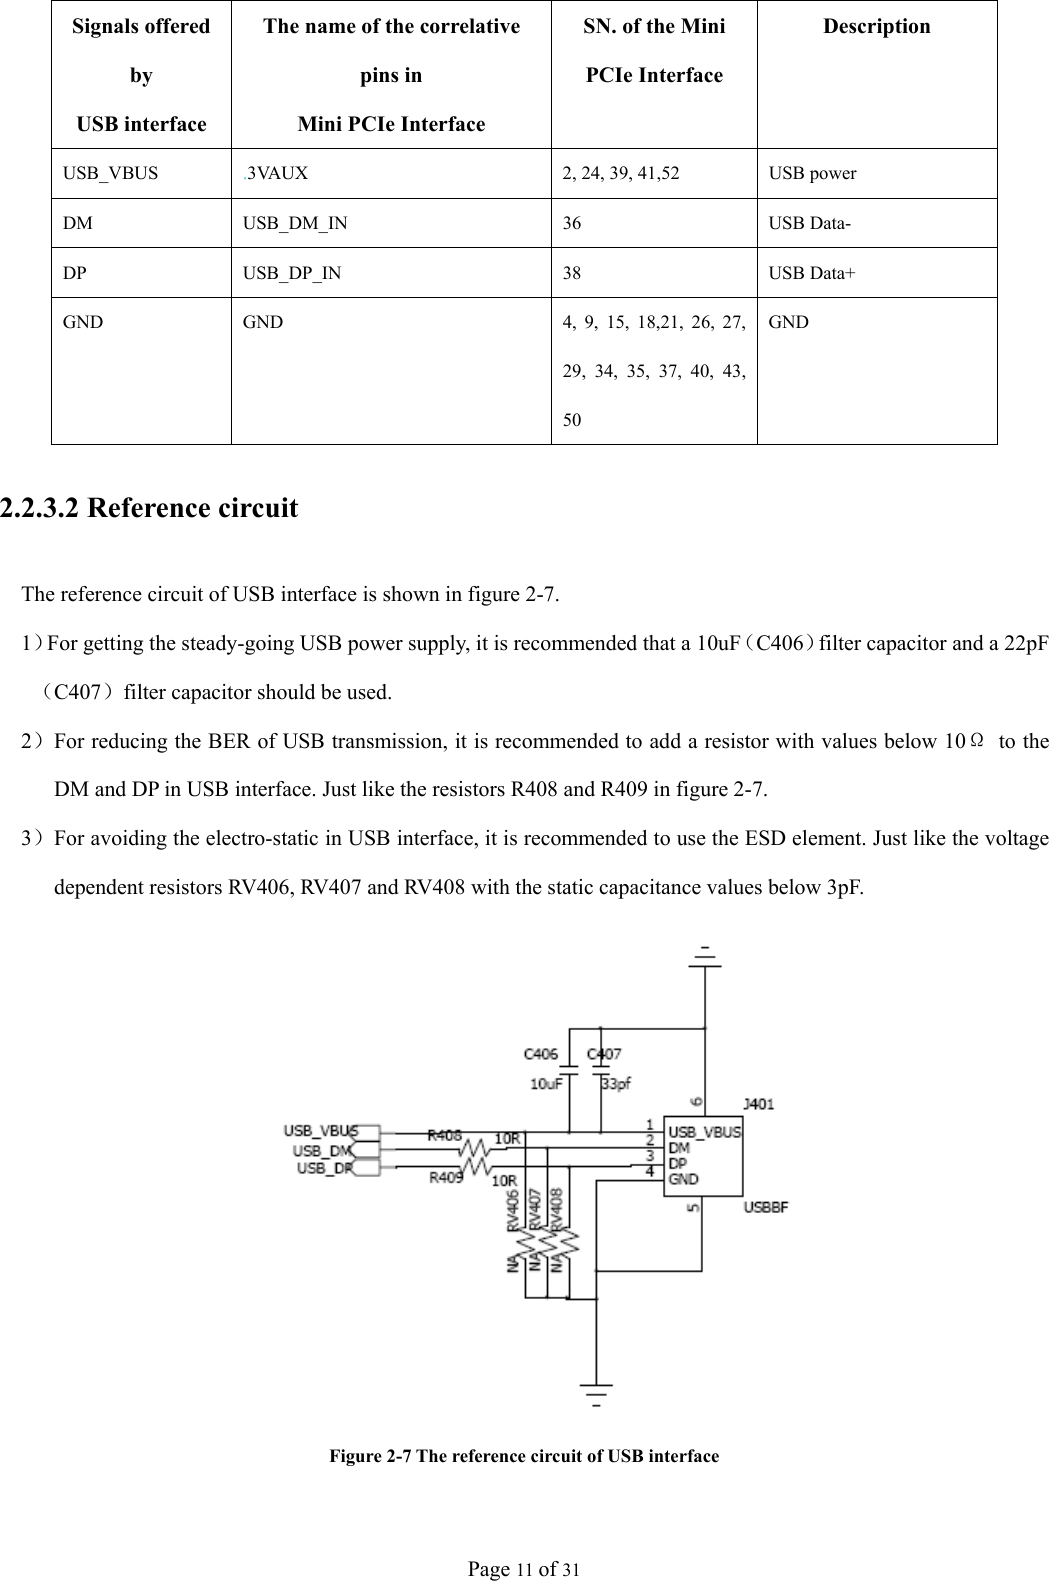 Page 11 of 31 Signals offered by USB interface The name of the correlative pins in   Mini PCIe Interface SN. of the Mini PCIe Interface Description USB_VBUS  .3VAUX  2, 24, 39, 41,52  USB power DM USB_DM_IN  36  USB Data- DP USB_DP_IN  38  USB Data+ GND  GND  4, 9, 15, 18,21, 26, 27, 29, 34, 35, 37, 40, 43, 50 GND 2.2.3.2 Reference circuit     The reference circuit of USB interface is shown in figure 2-7. 1）For getting the steady-going USB power supply, it is recommended that a 10uF（C406）filter capacitor and a 22pF（C407）filter capacitor should be used.   2）For reducing the BER of USB transmission, it is recommended to add a resistor with values below 10Ω to the DM and DP in USB interface. Just like the resistors R408 and R409 in figure 2-7. 3）For avoiding the electro-static in USB interface, it is recommended to use the ESD element. Just like the voltage dependent resistors RV406, RV407 and RV408 with the static capacitance values below 3pF.  Figure 2-7 The reference circuit of USB interface 